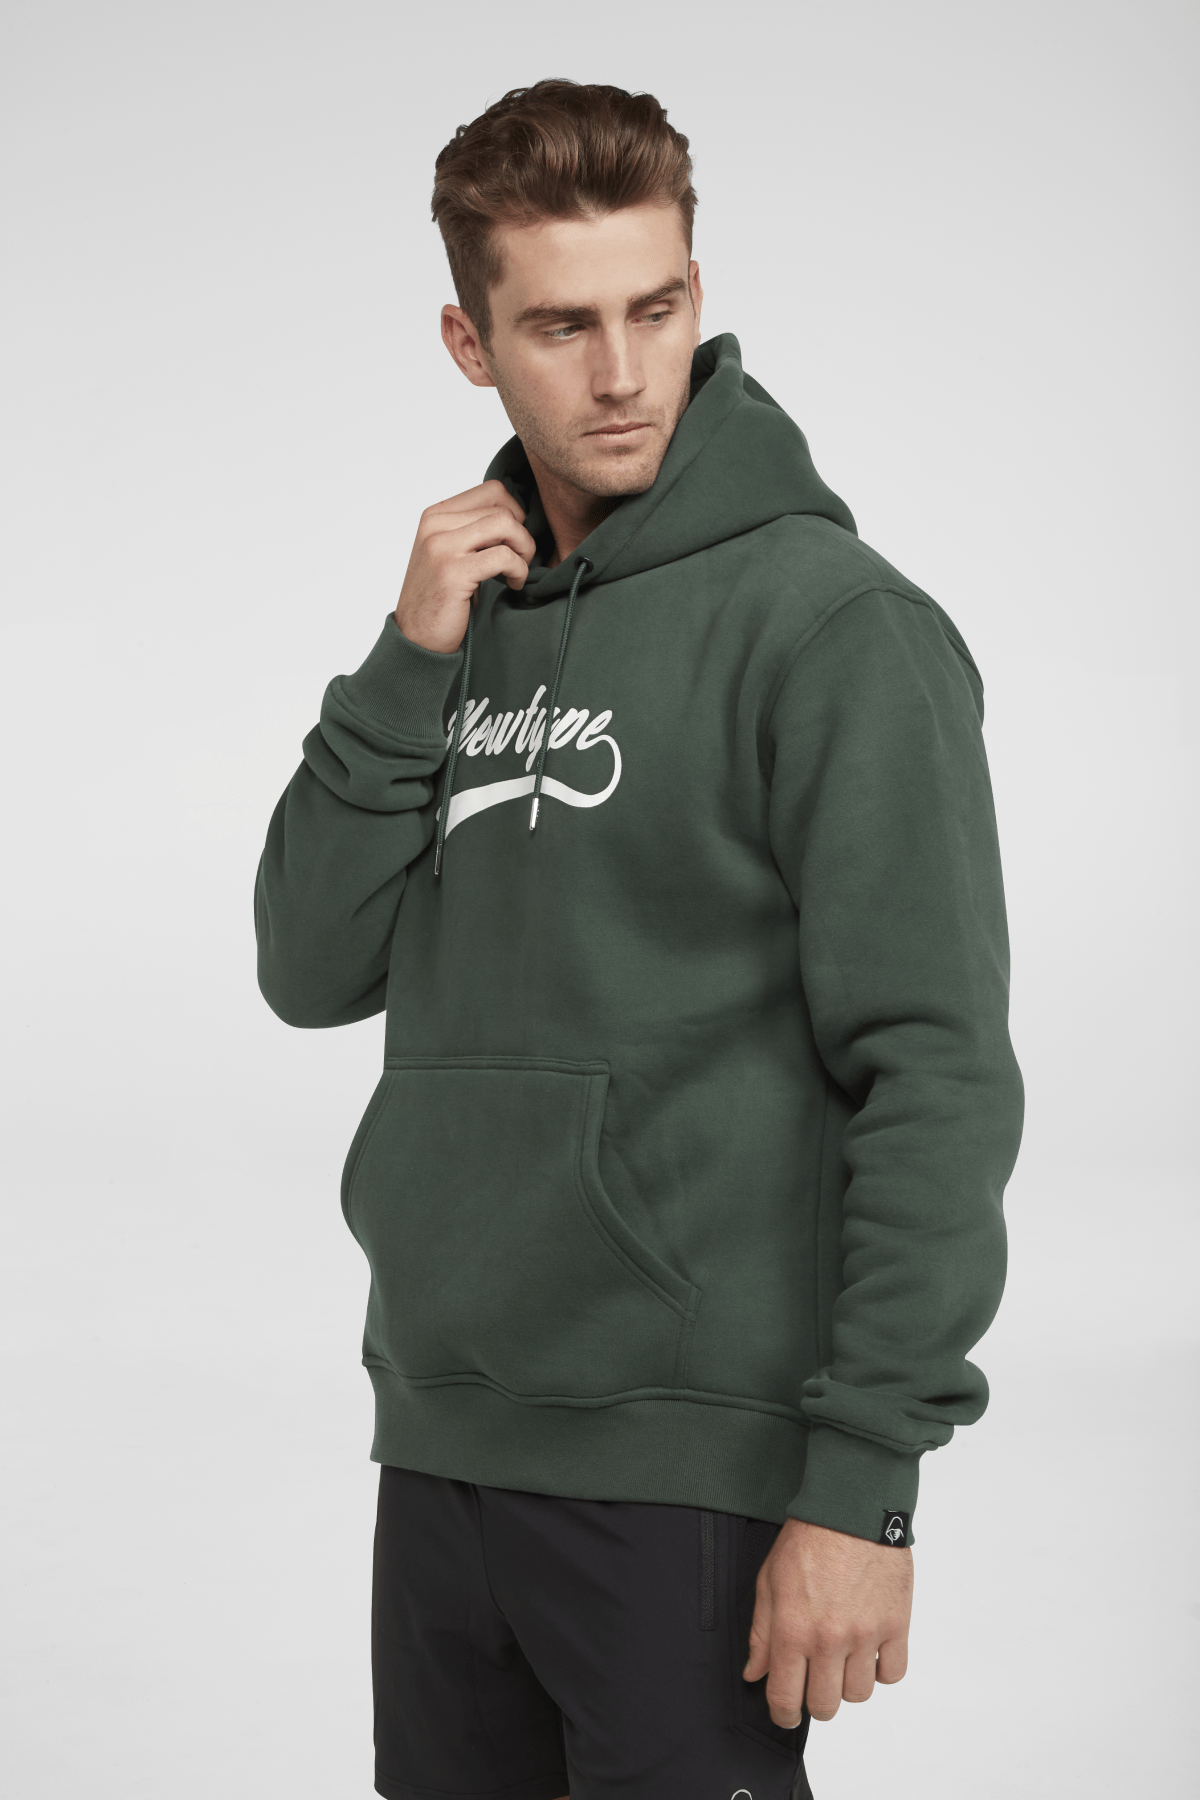 Newtype Official Hoodies Dynamic Hooded Pullover Sweatshirt - Forest Green